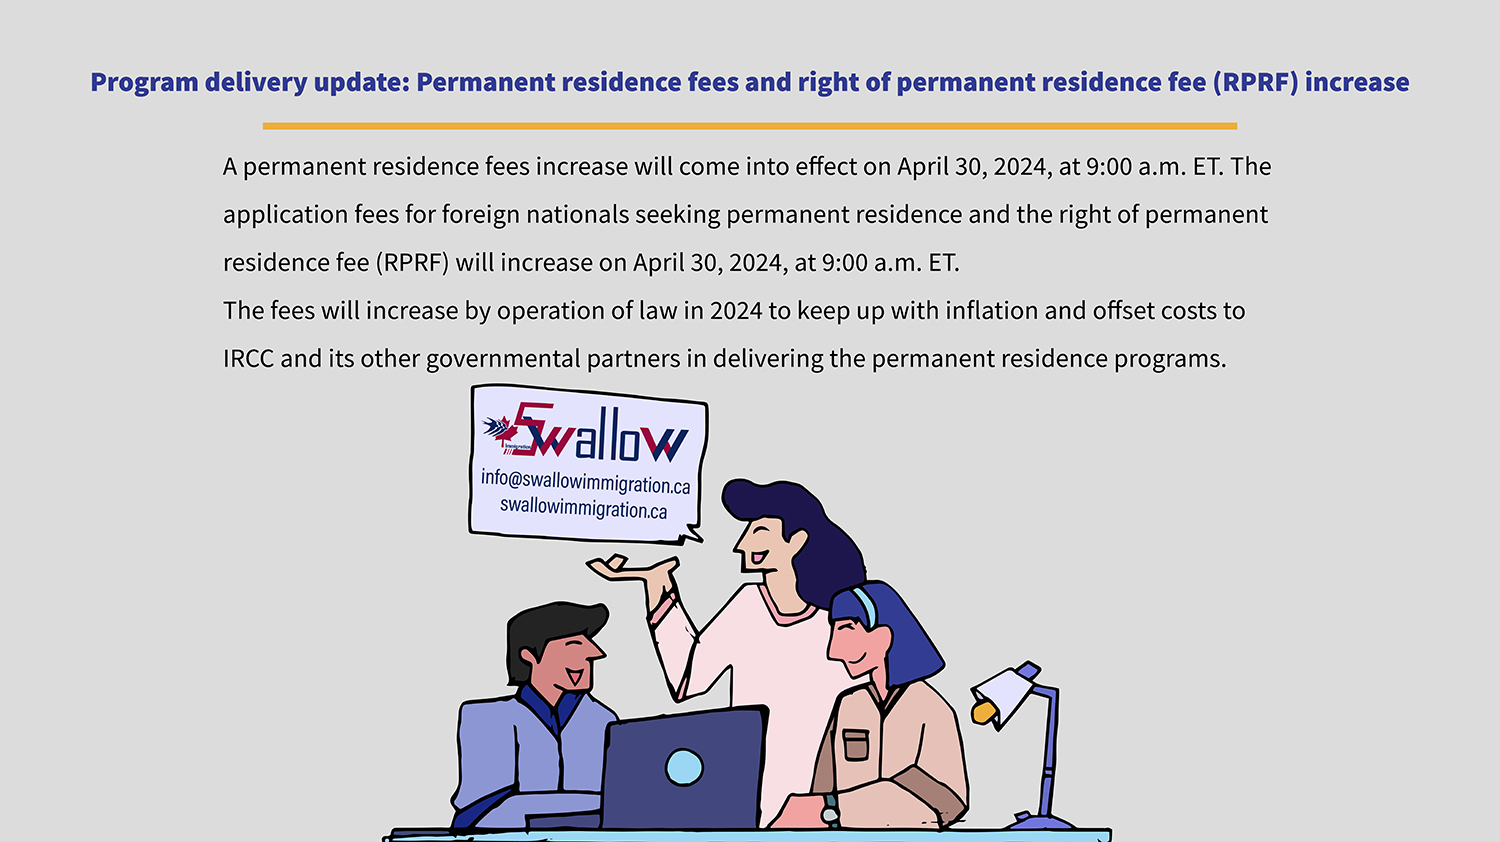 Program delivery update: Permanent residence fees and right of permanent residence fee (RPRF) increase